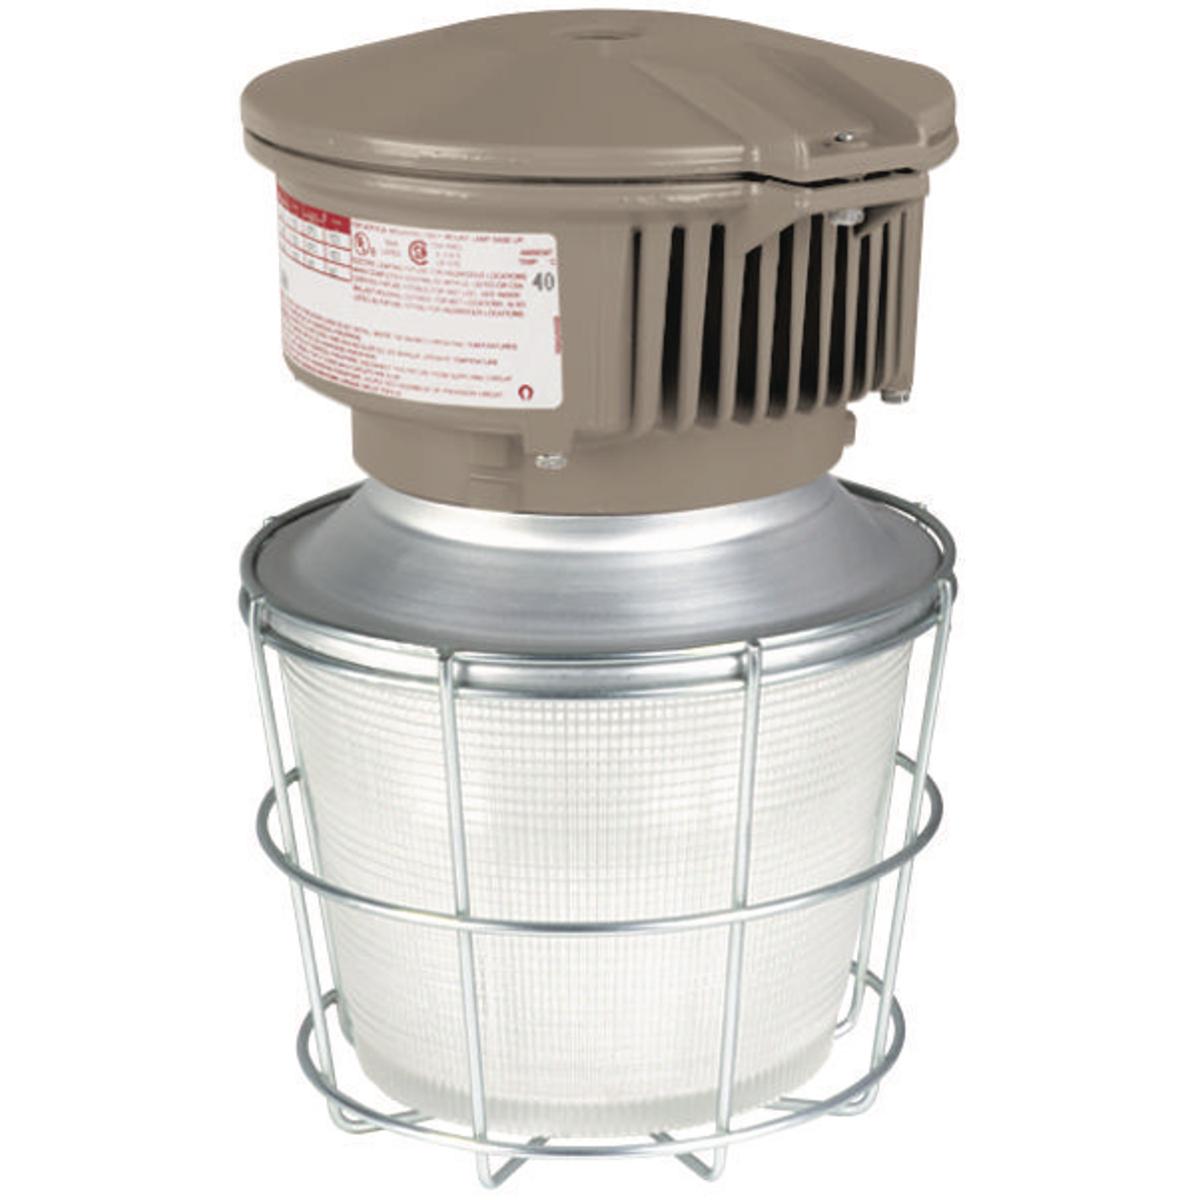 Hubbell MBL2230A2S8G The MBL Series is a compact low bay energy efficient LED. The design of the MBL makes it suitable for harsh and hazardous environments using a cast copper-free aluminum. Its low profile and compact design allow the MBL to fit in areas where larger fixture